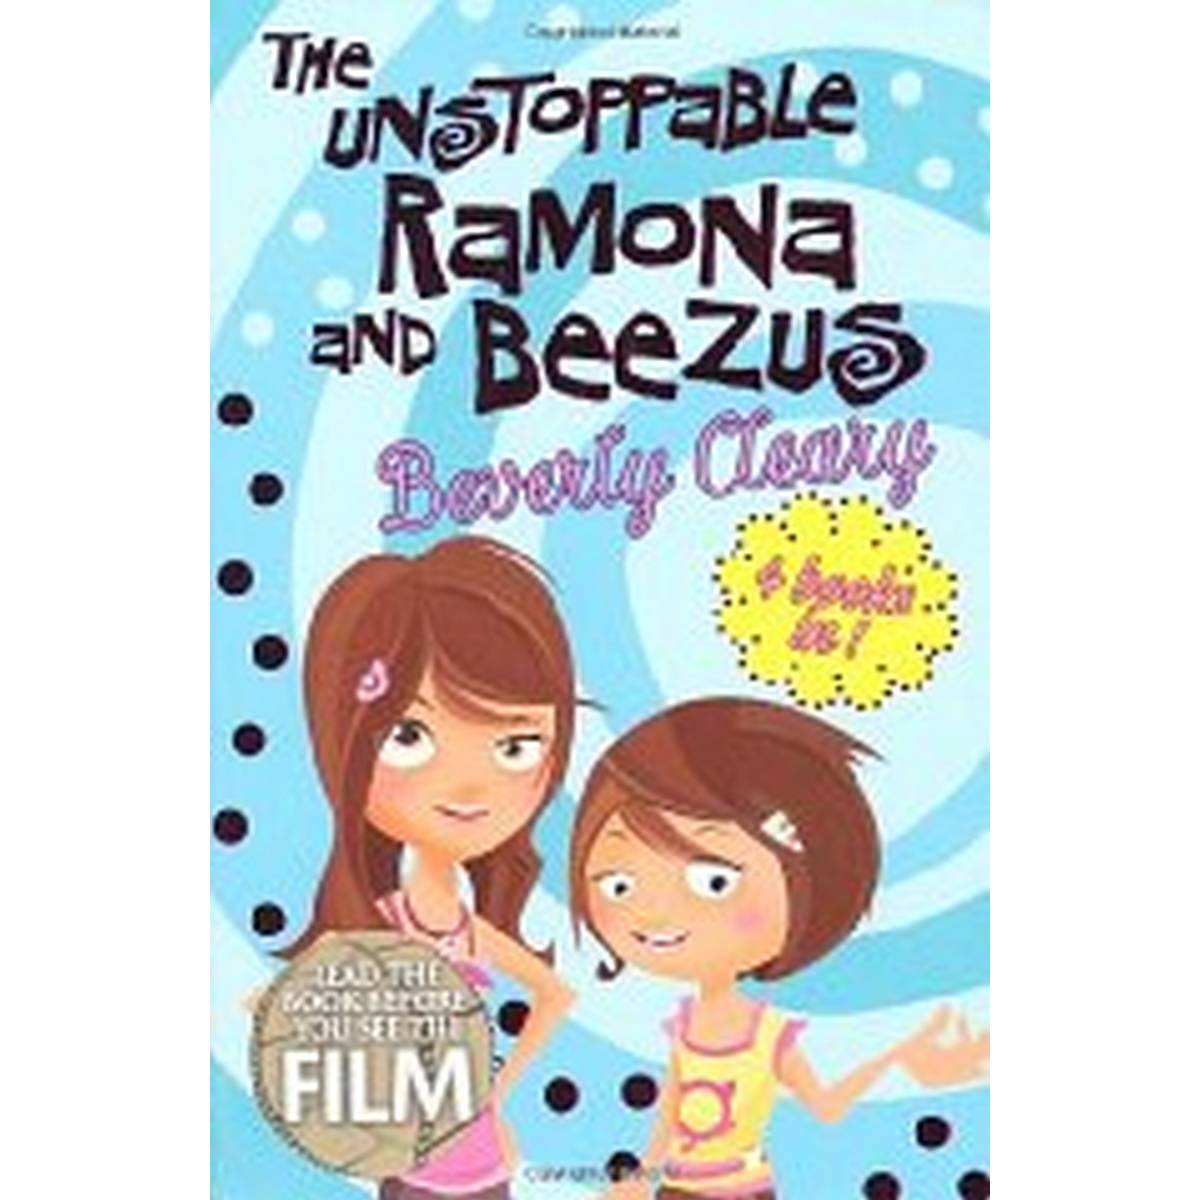 The Unstoppable Ramona and Beezus (4 books in 1)